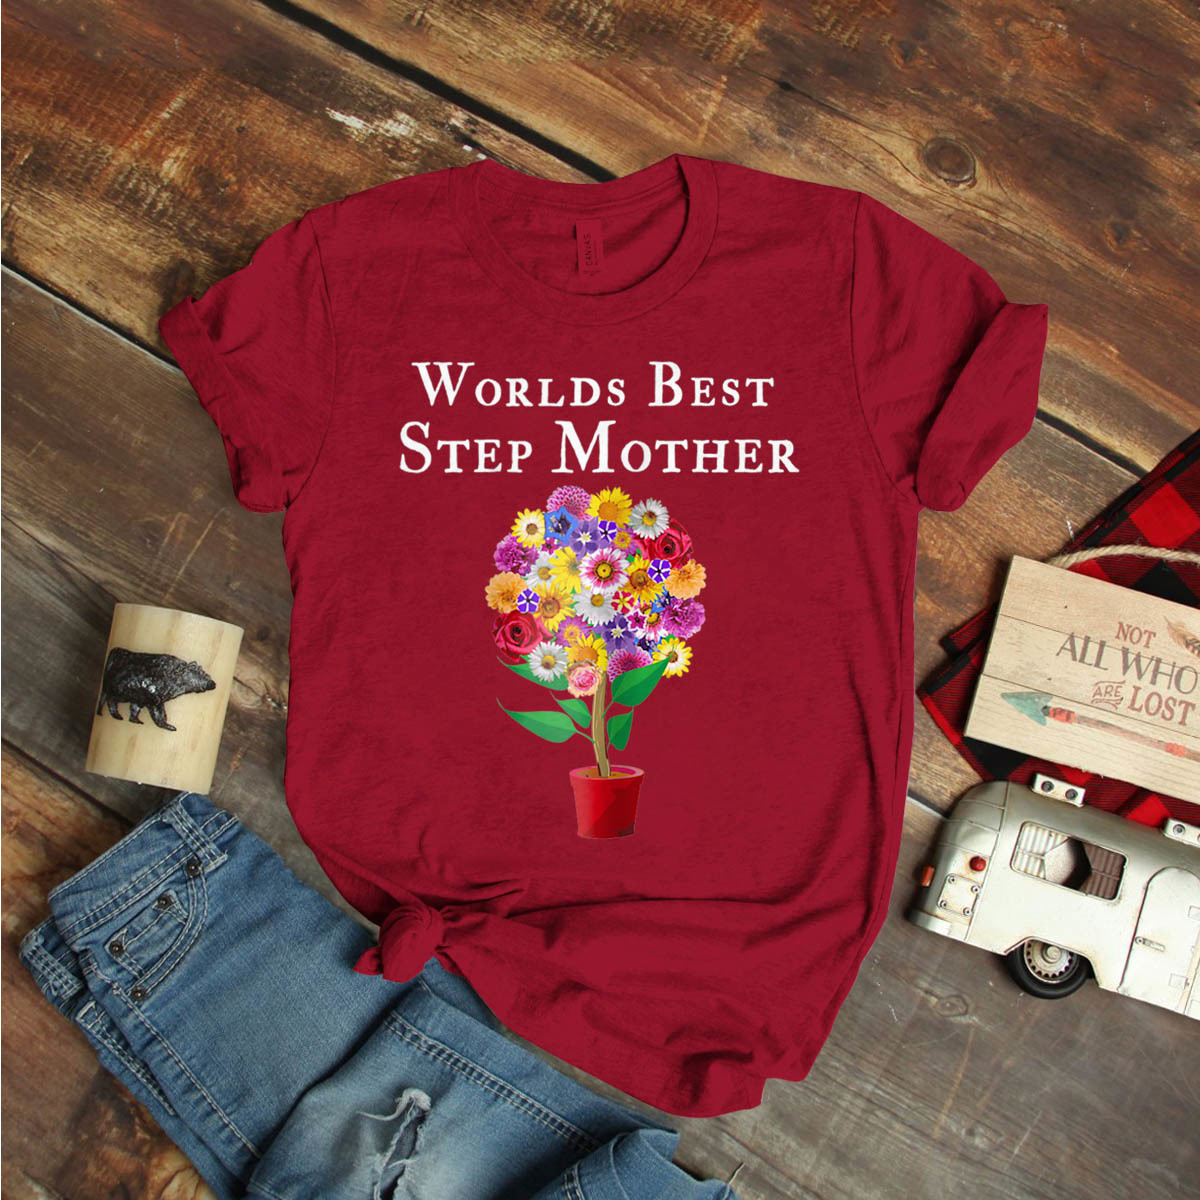 Birthday Gift Ideas For Stepmom
 Womens World S Best Step Mother For Step Mom Funny Ideas